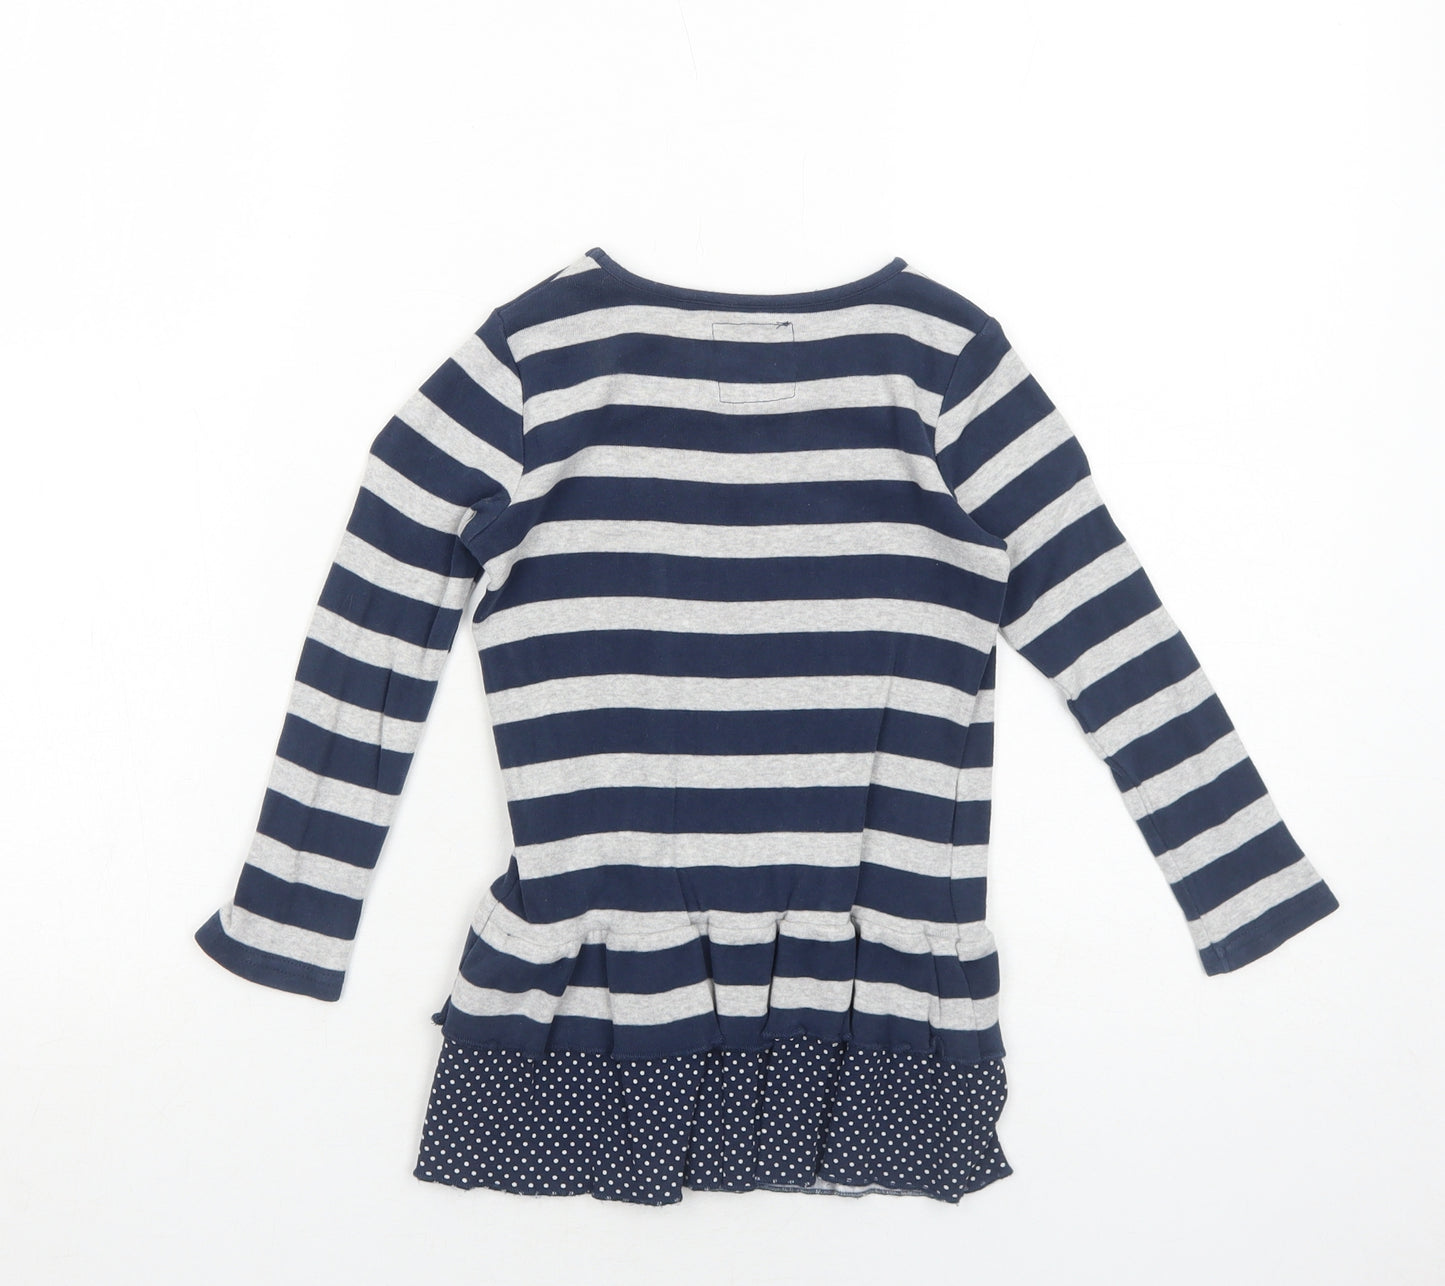 NEXT Girls Blue Striped Cotton Jumper Dress Size 3-4 Years Boat Neck Pullover